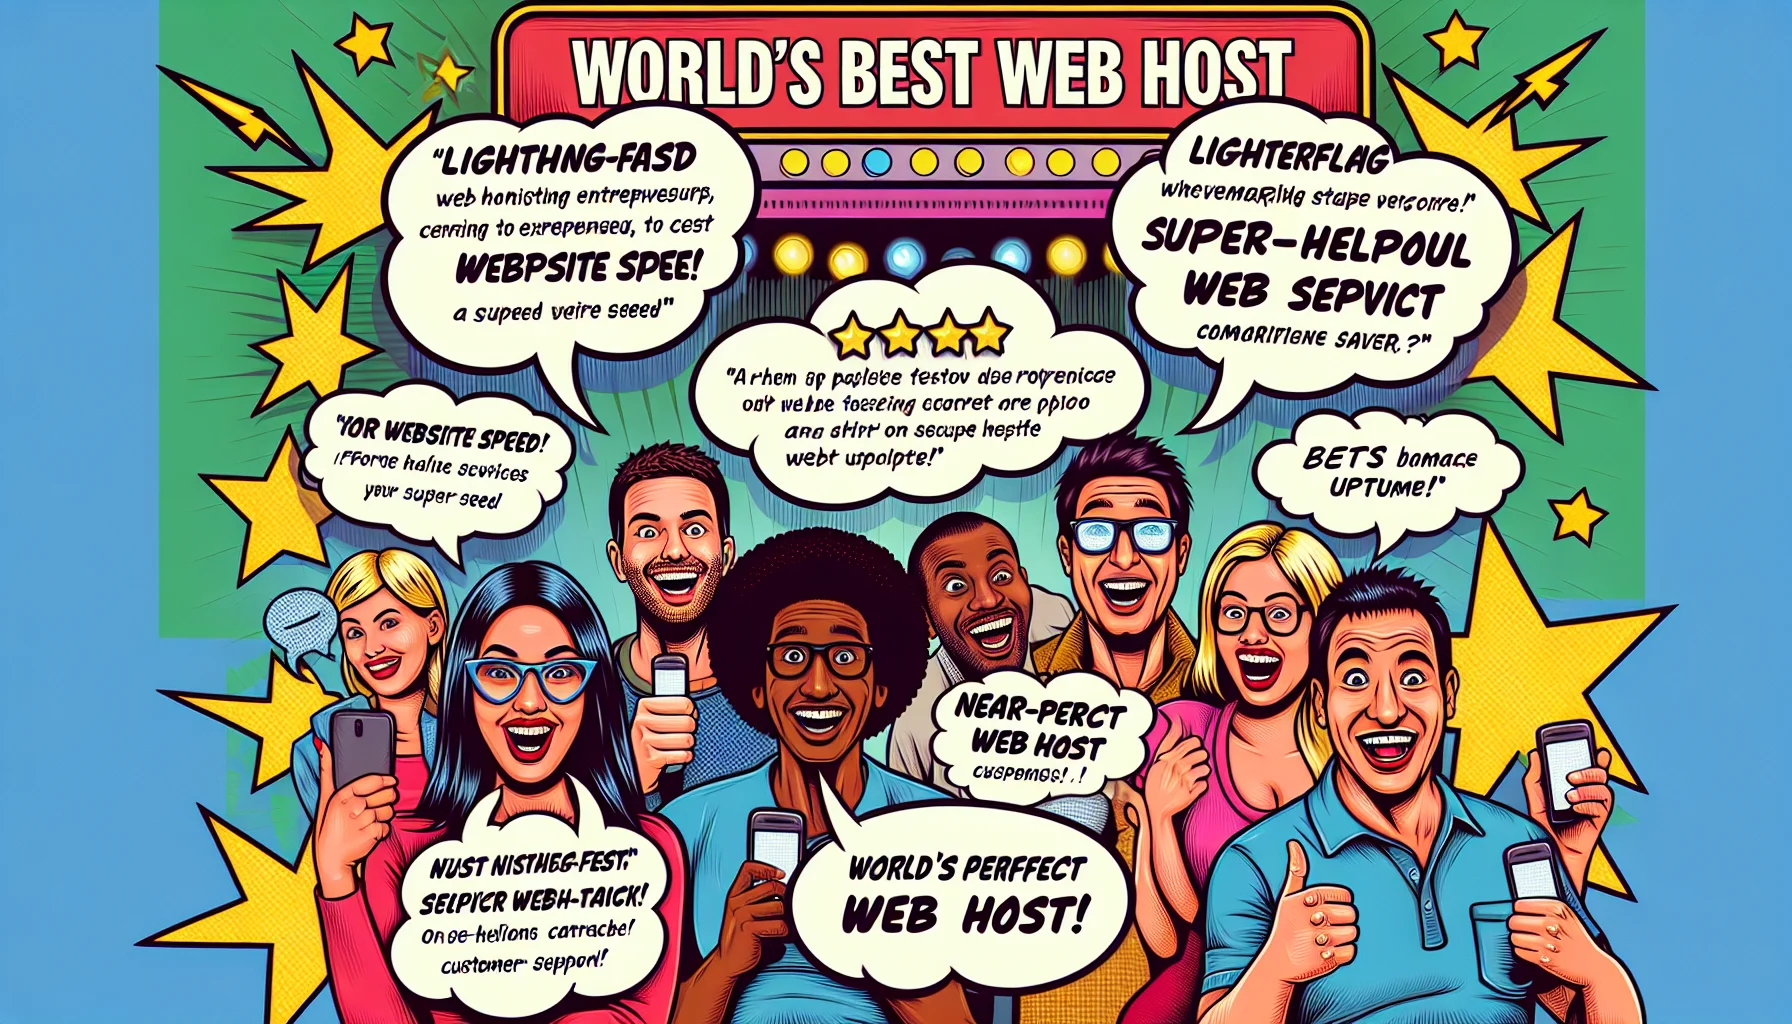 Create an image showcasing comically exaggerated reviews for a fictional web hosting company. Show different users, including a happy Hispanic female entrepreneur, a delighted Black male coder, and a satisfied South Asian female graphic designer, all enthusiastically discussing their positive experiences with the service. They are surrounded by comic cloud bubbles depicting lightning-fast website speed, near-perfect uptime, and hilarious scenarios of super-helpful customer support. A neon sign in the backdrop humorously reads 'World's Best Web Host'. The styles should reflect lighthearted fun and satire to entice viewers.